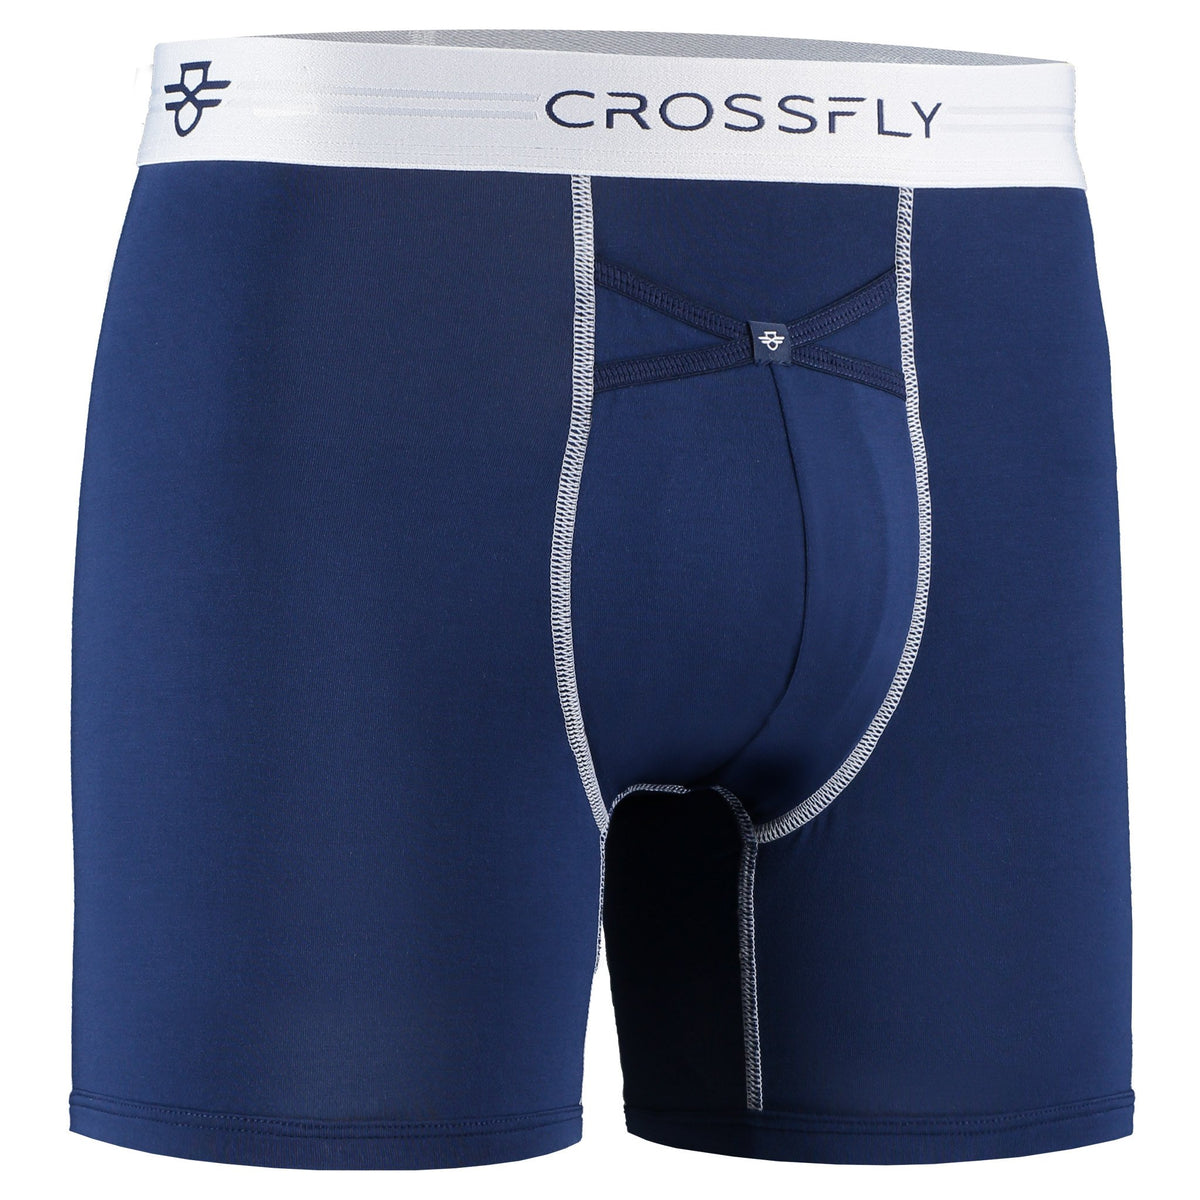 Crossfly men&#39;s IKON X 6&quot; navy / white boxers from the Everyday series, featuring X-Fly and Coccoon internal pocket support.